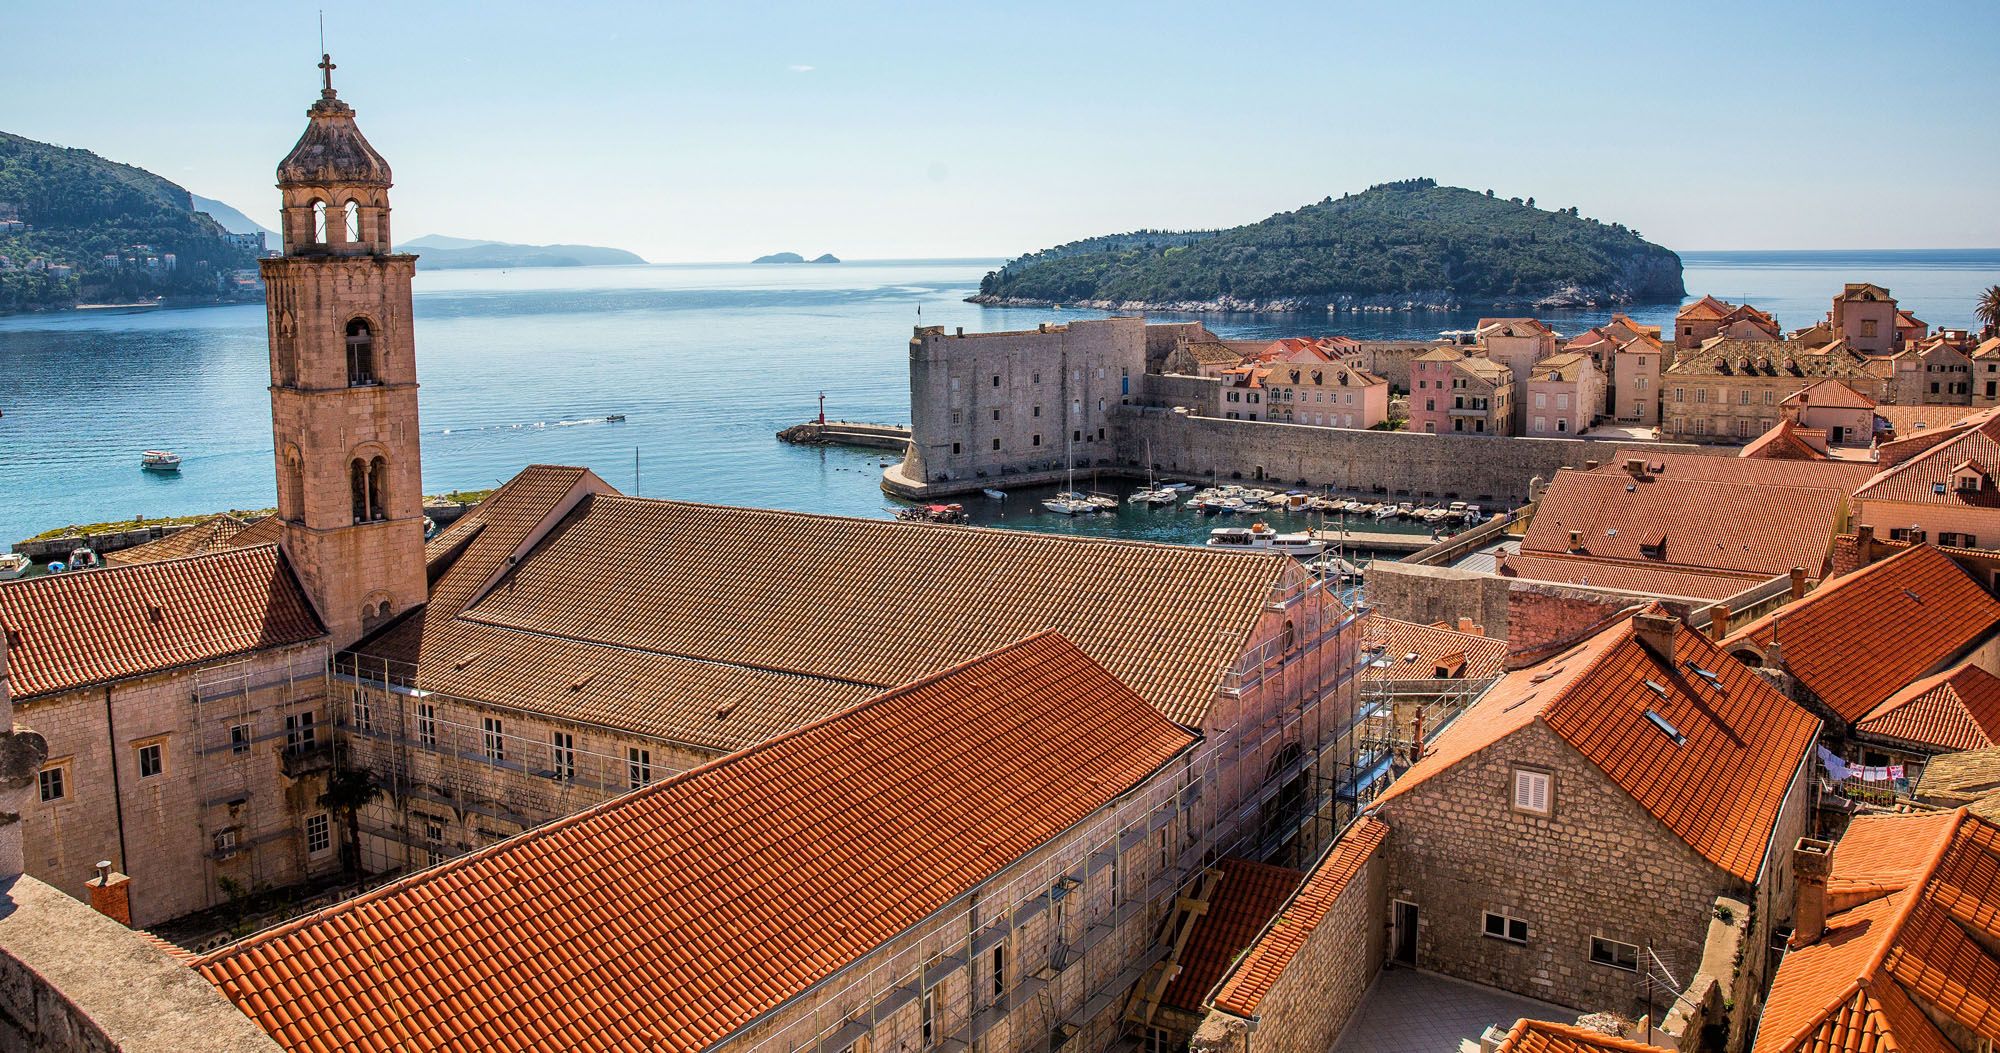 Featured image for “A Walk on the Dubrovnik Walls in 20 Amazing Photos”